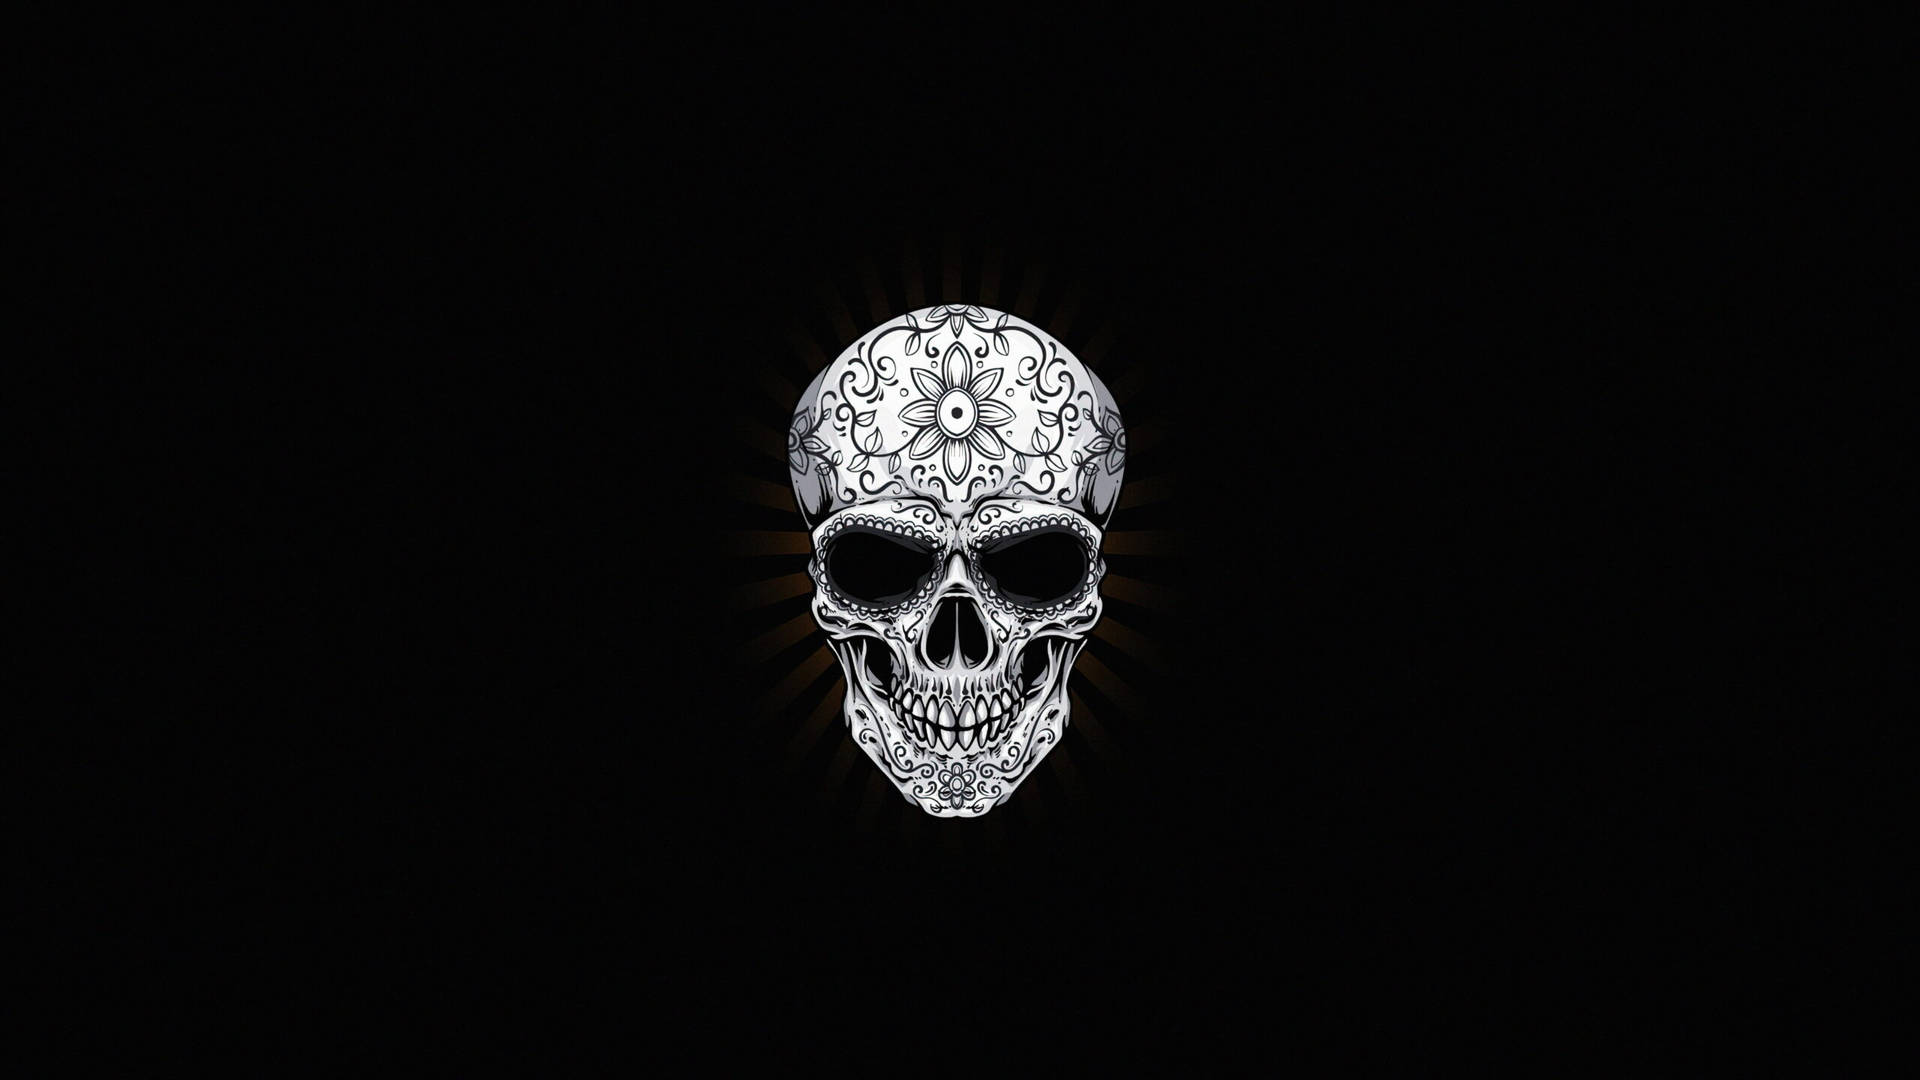 A Skull On A Black Background Wallpaper